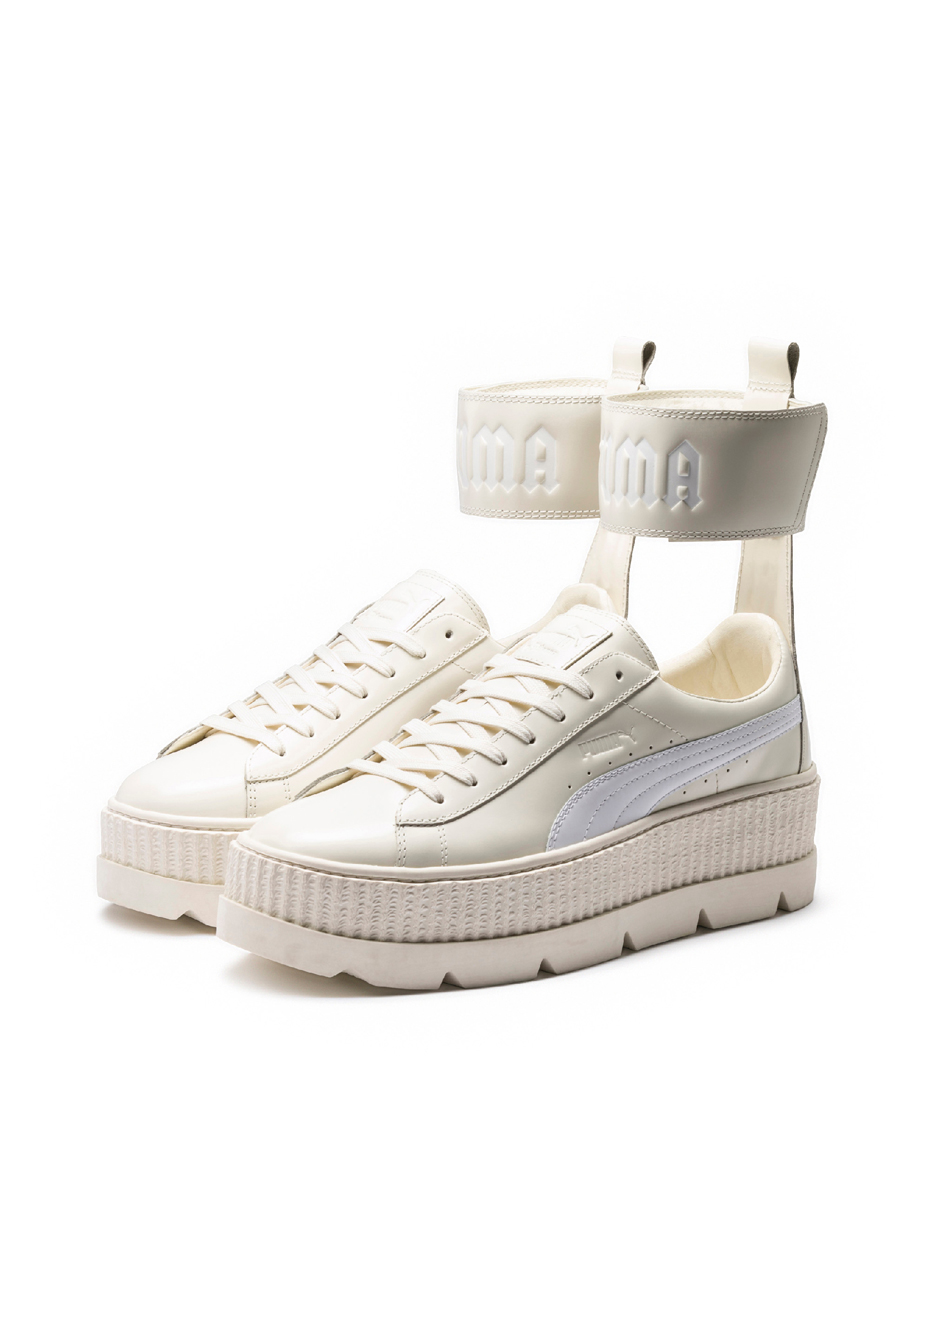 puma ankle strap sneakers